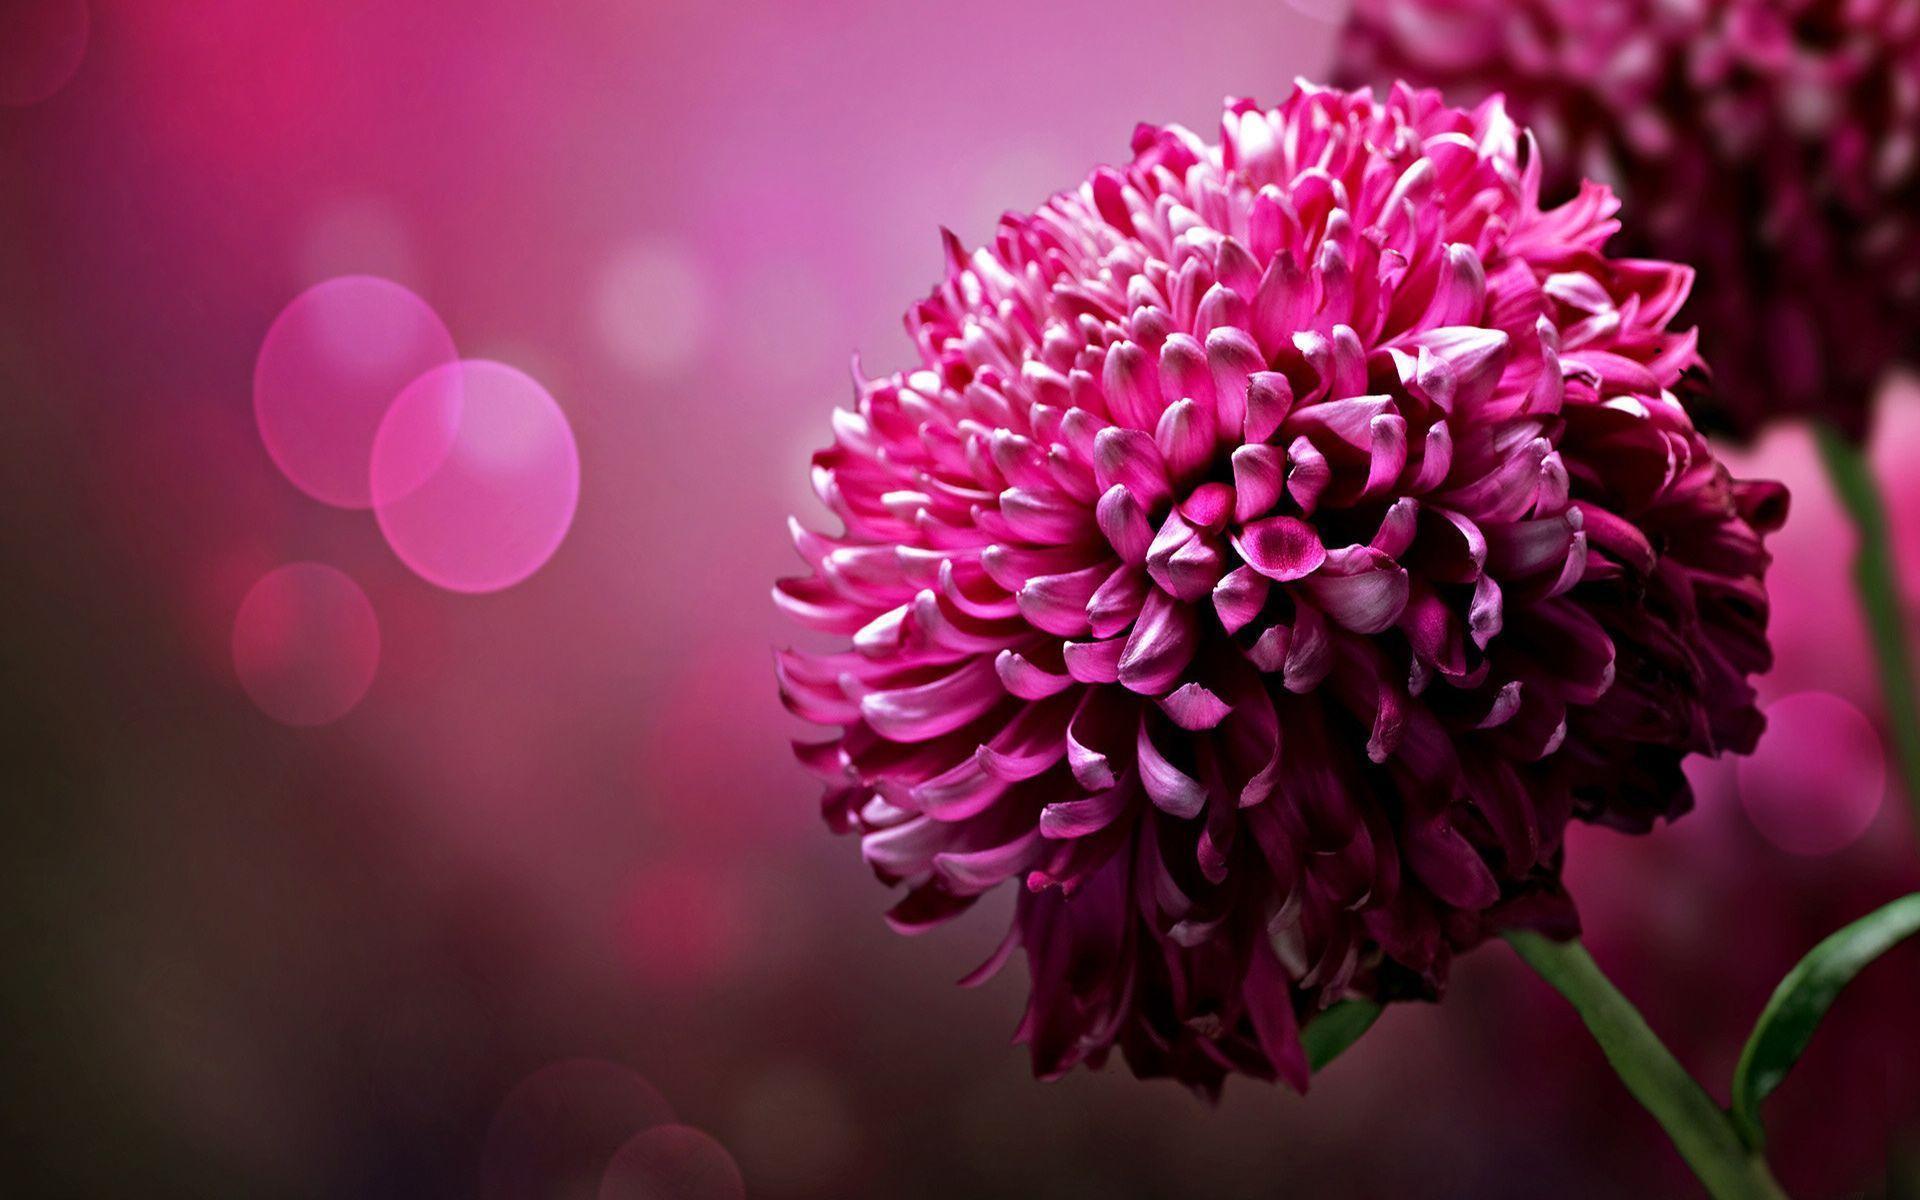 Pink Flowers Image High Resolution 2015 Background